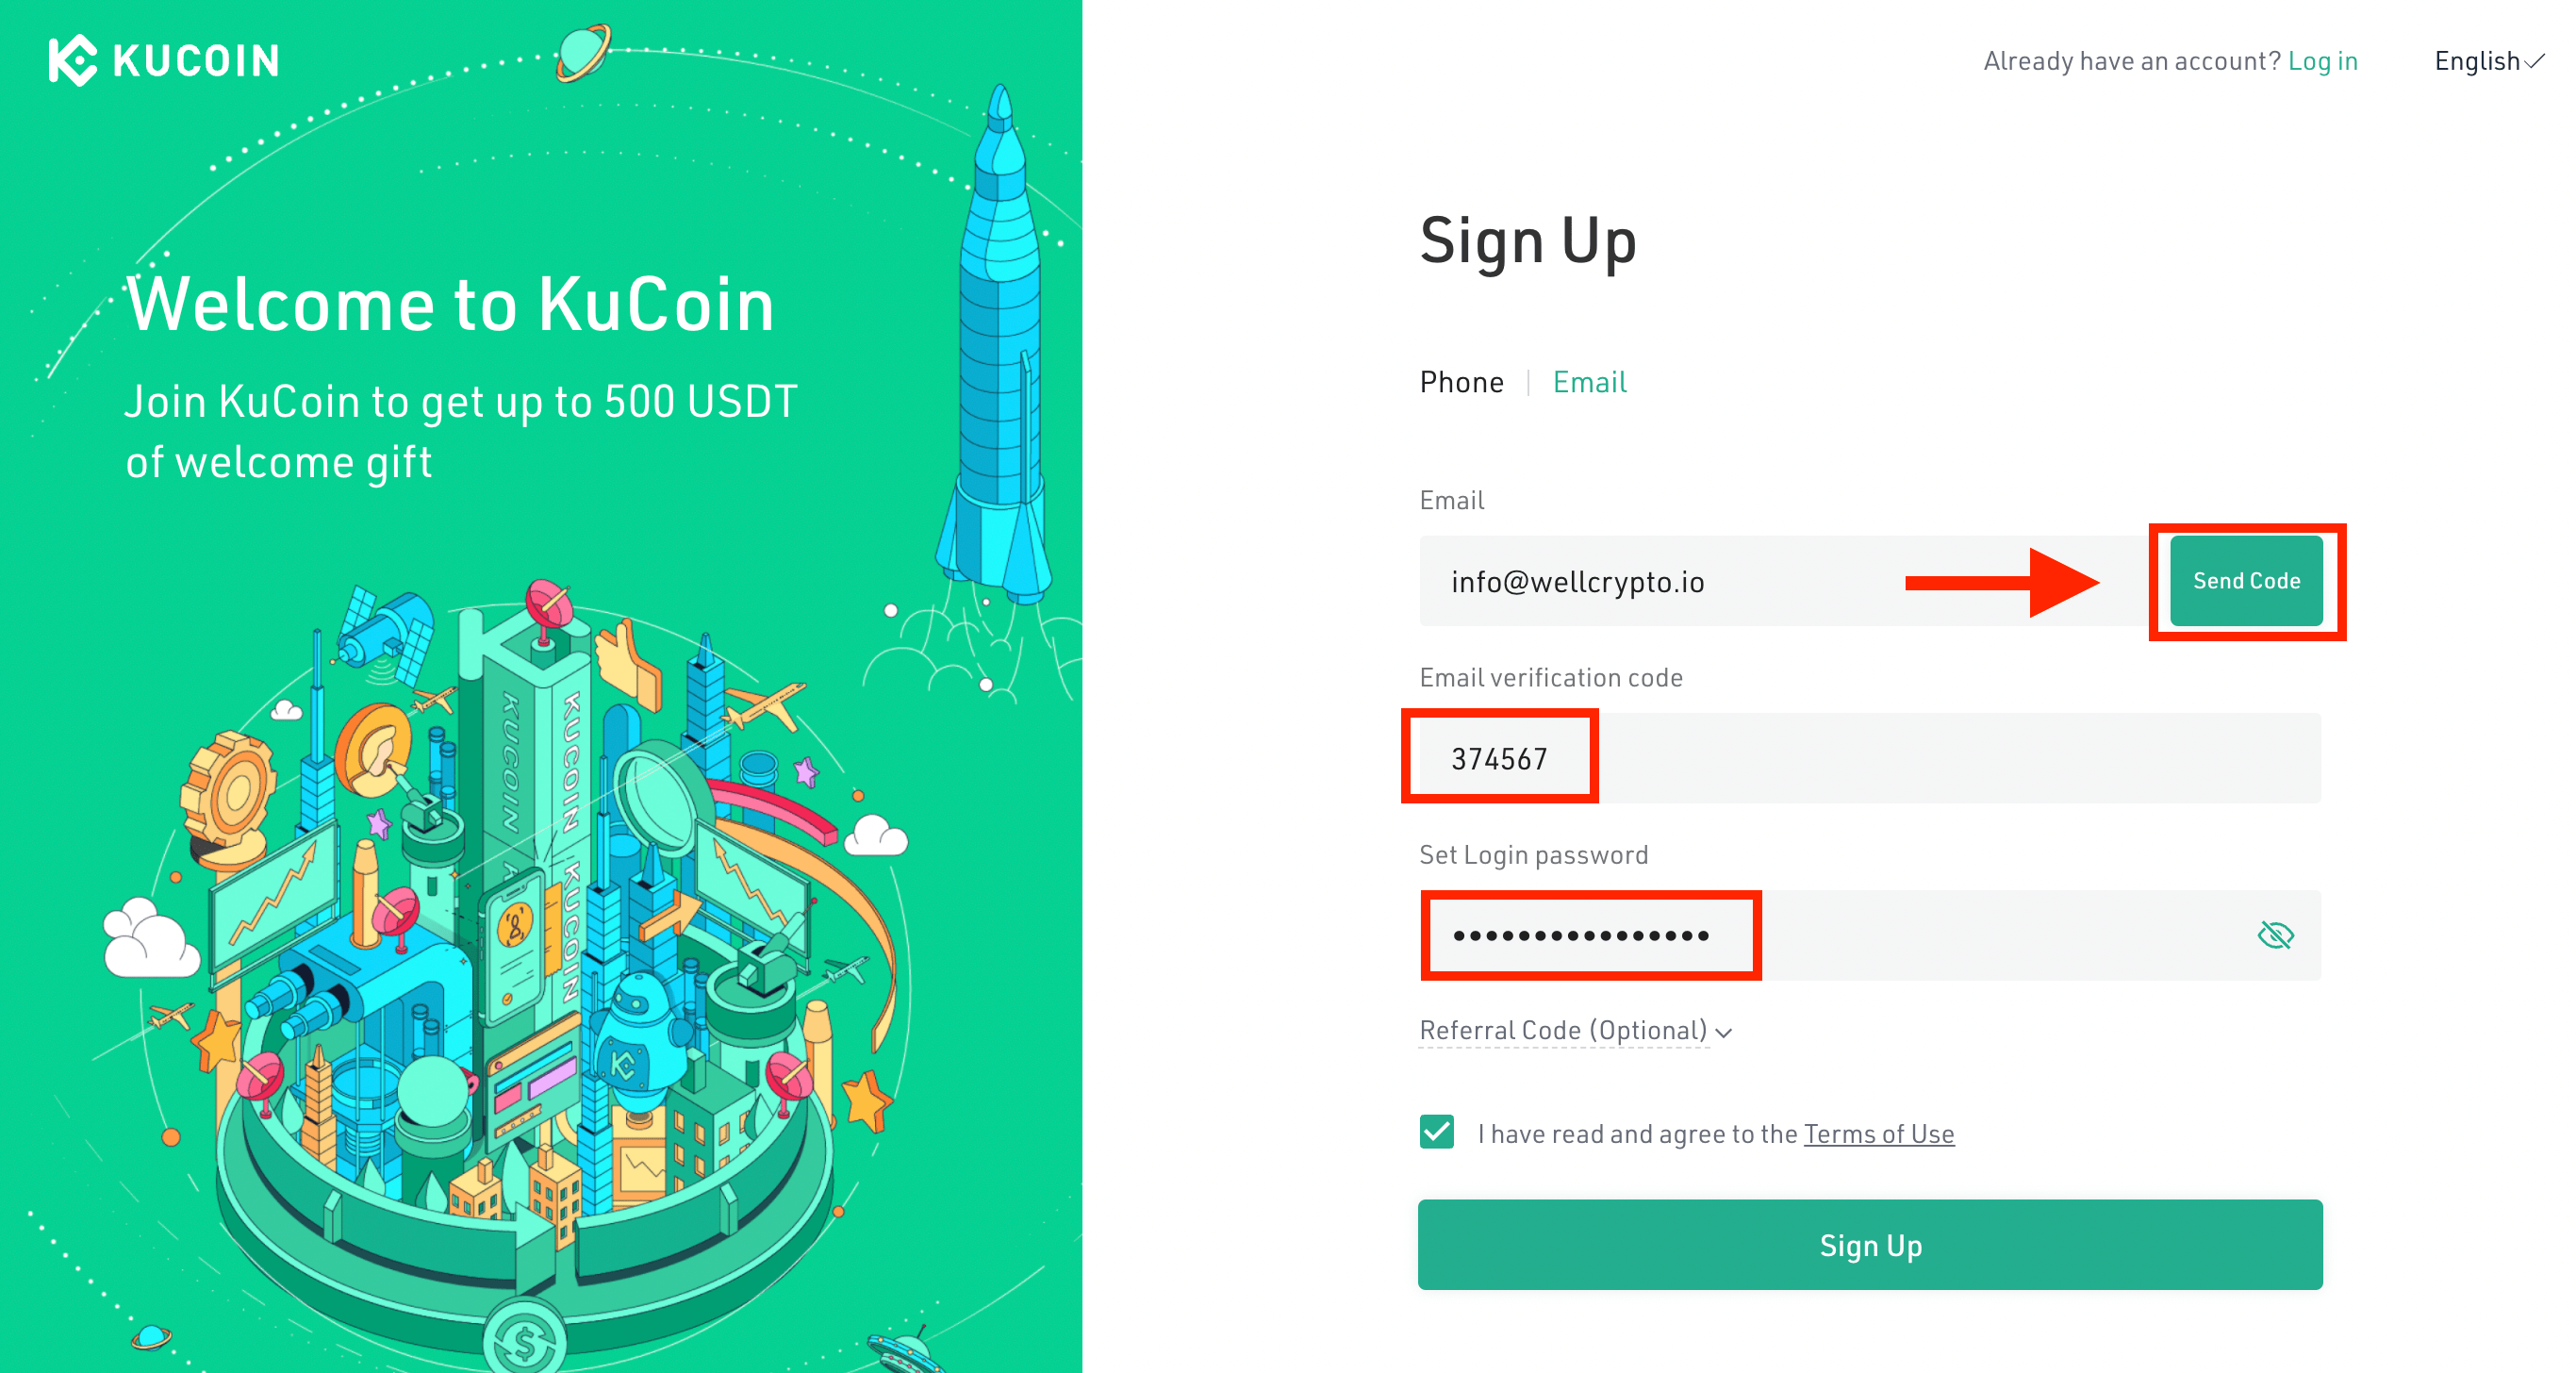 Opening an account on the KuCoin exchange